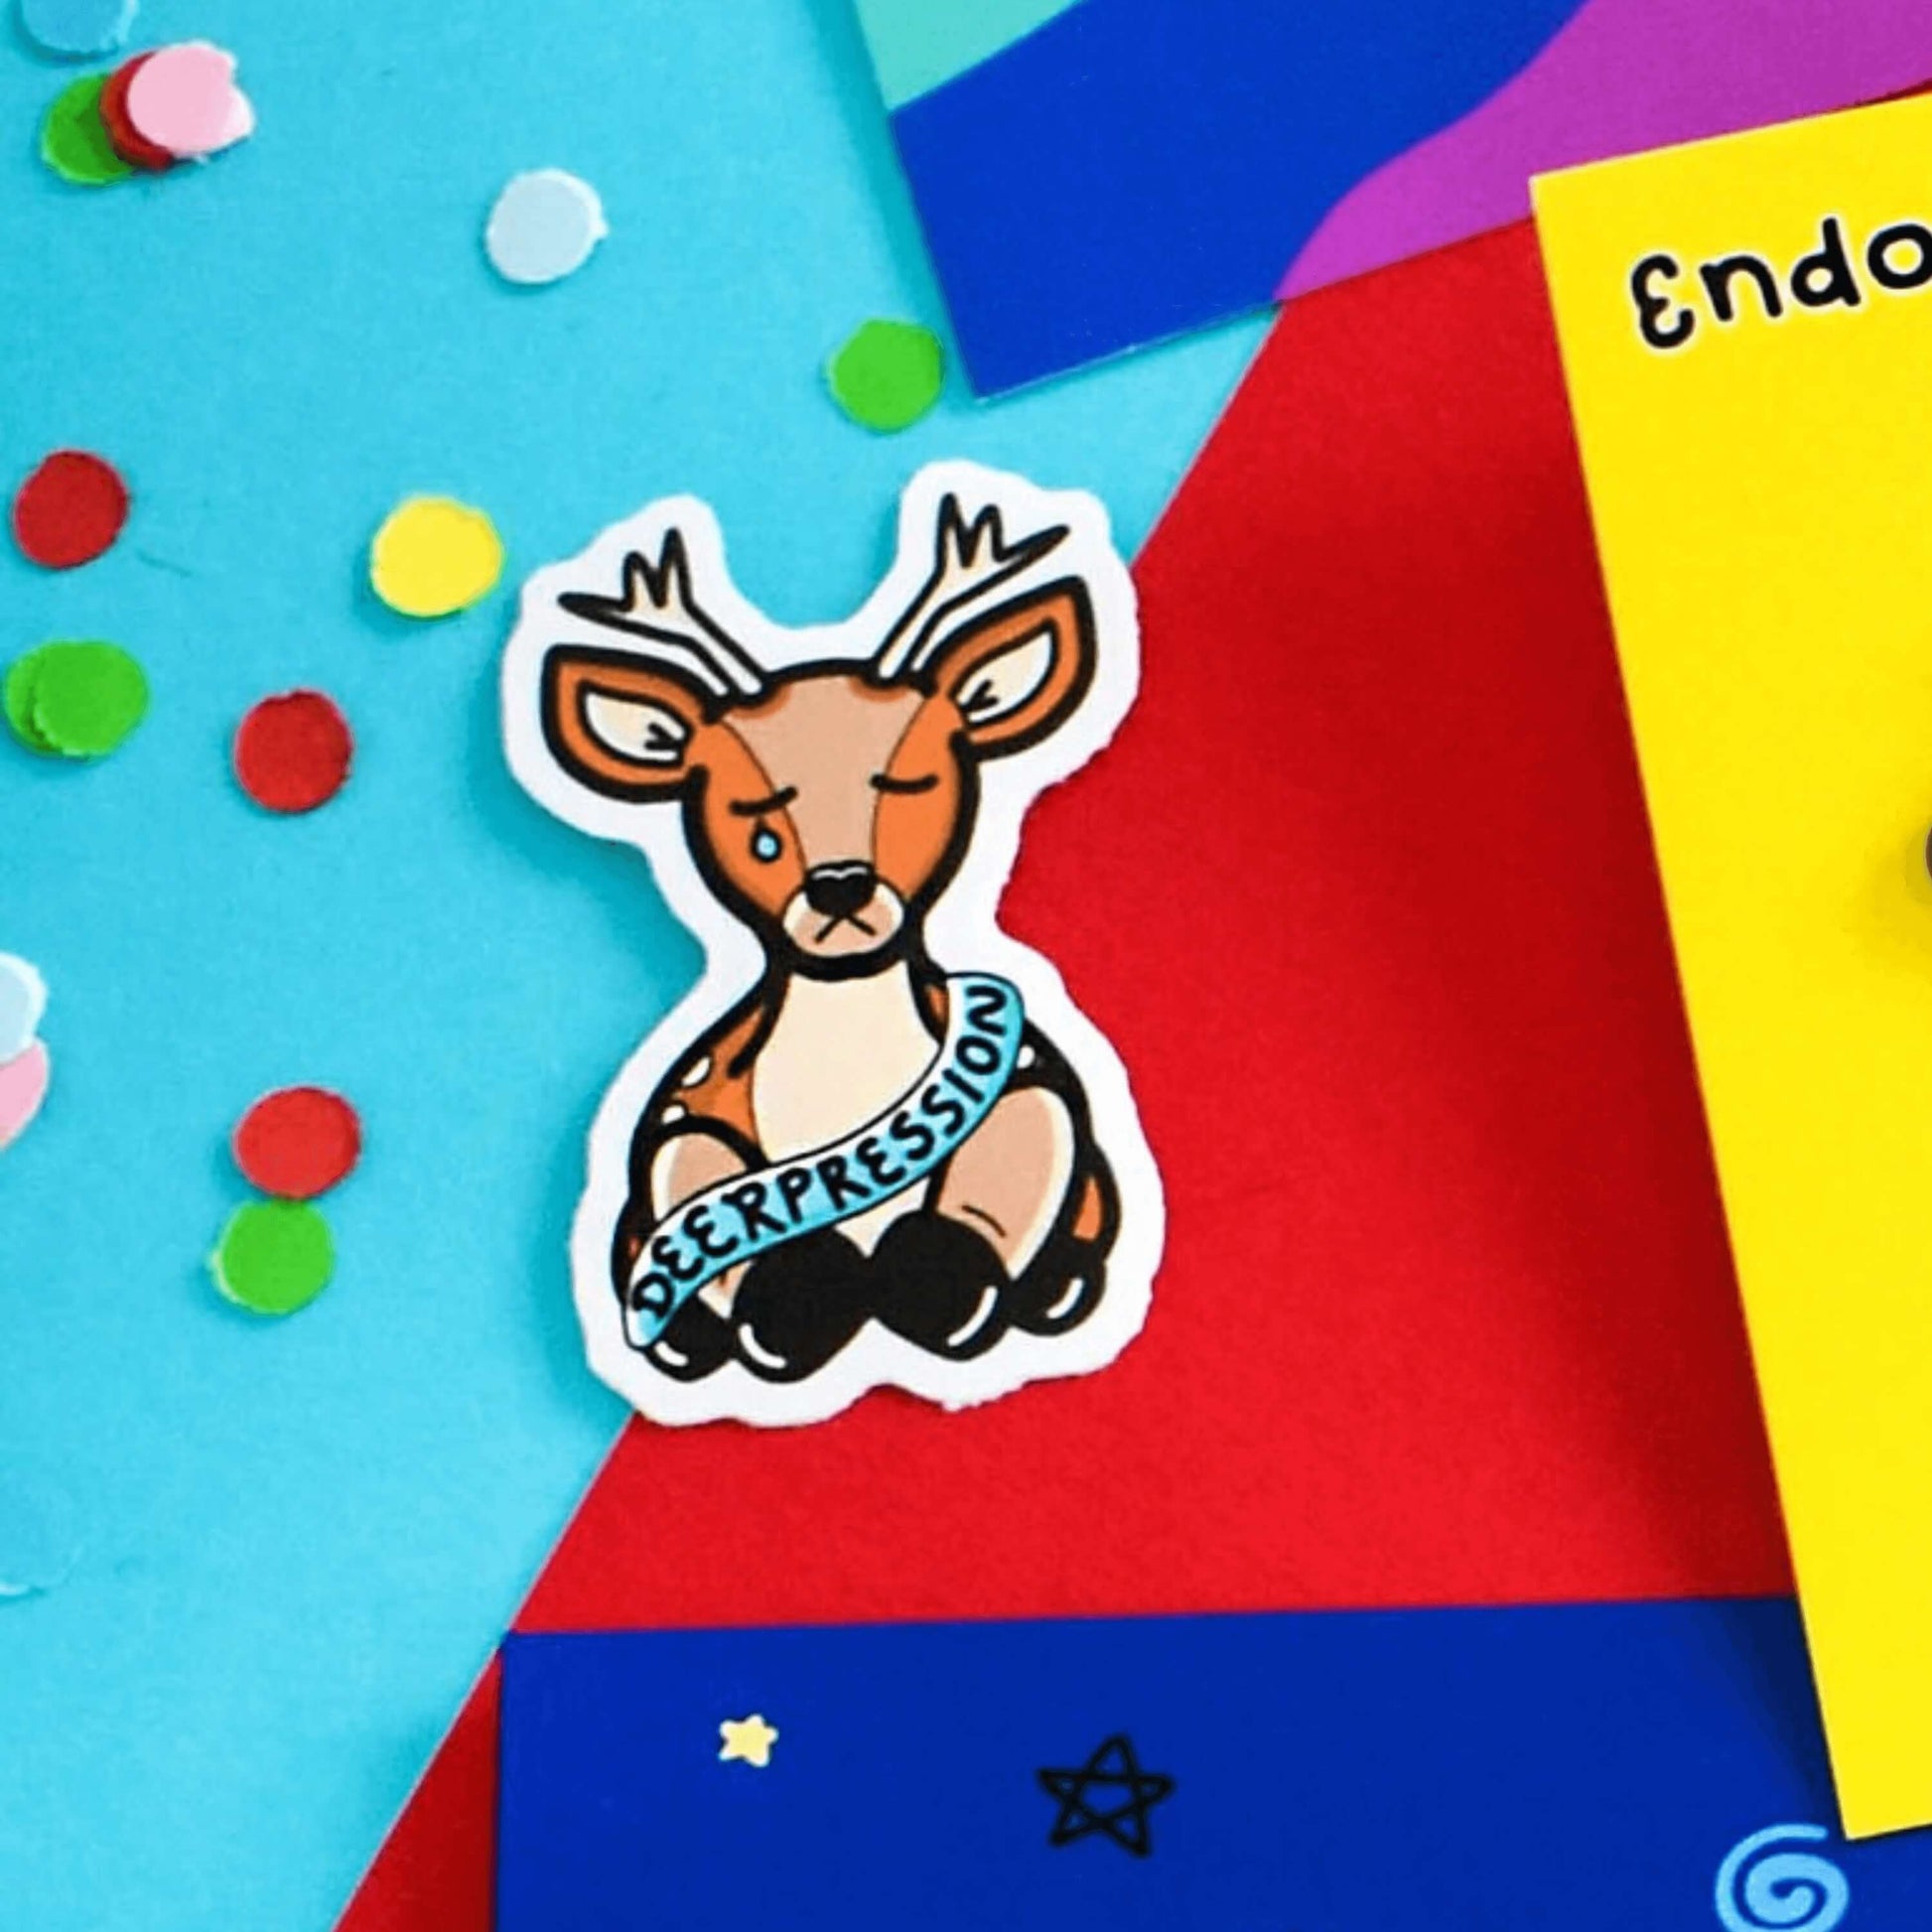 The Deerpression Sticker - Depression on a red and blue background with other innabox products and multicoloured confetti. The deer shaped sticker has its eyes closed with a tear falling down one cheek, across its middle is a blue banner with black text reading 'deerpression'. The design was created to raise awareness for depression.